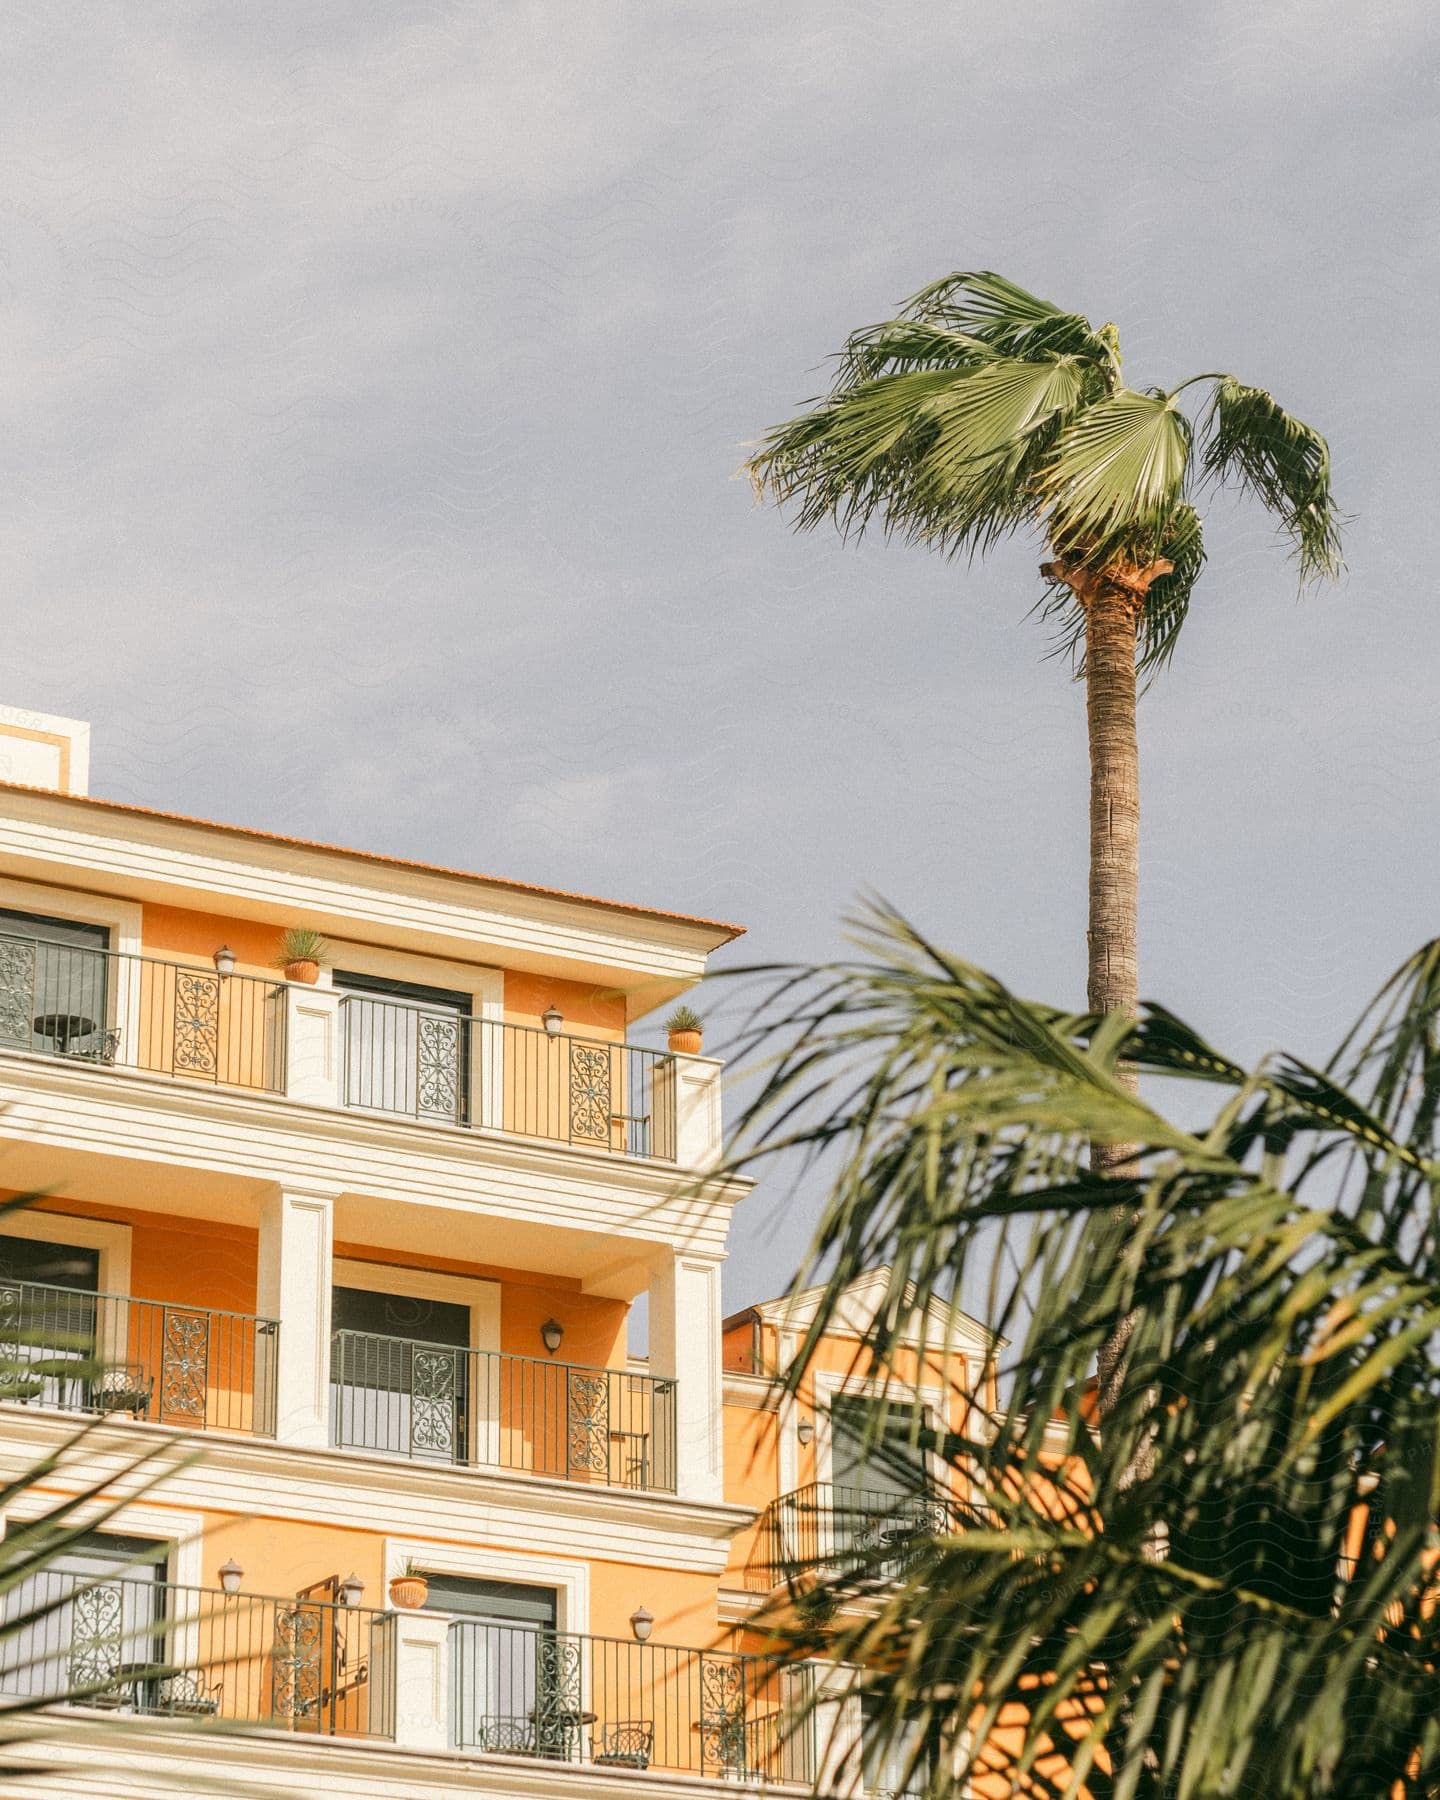 A healthy palm tree stands next to a yellow building with balconies, under a clear sky.